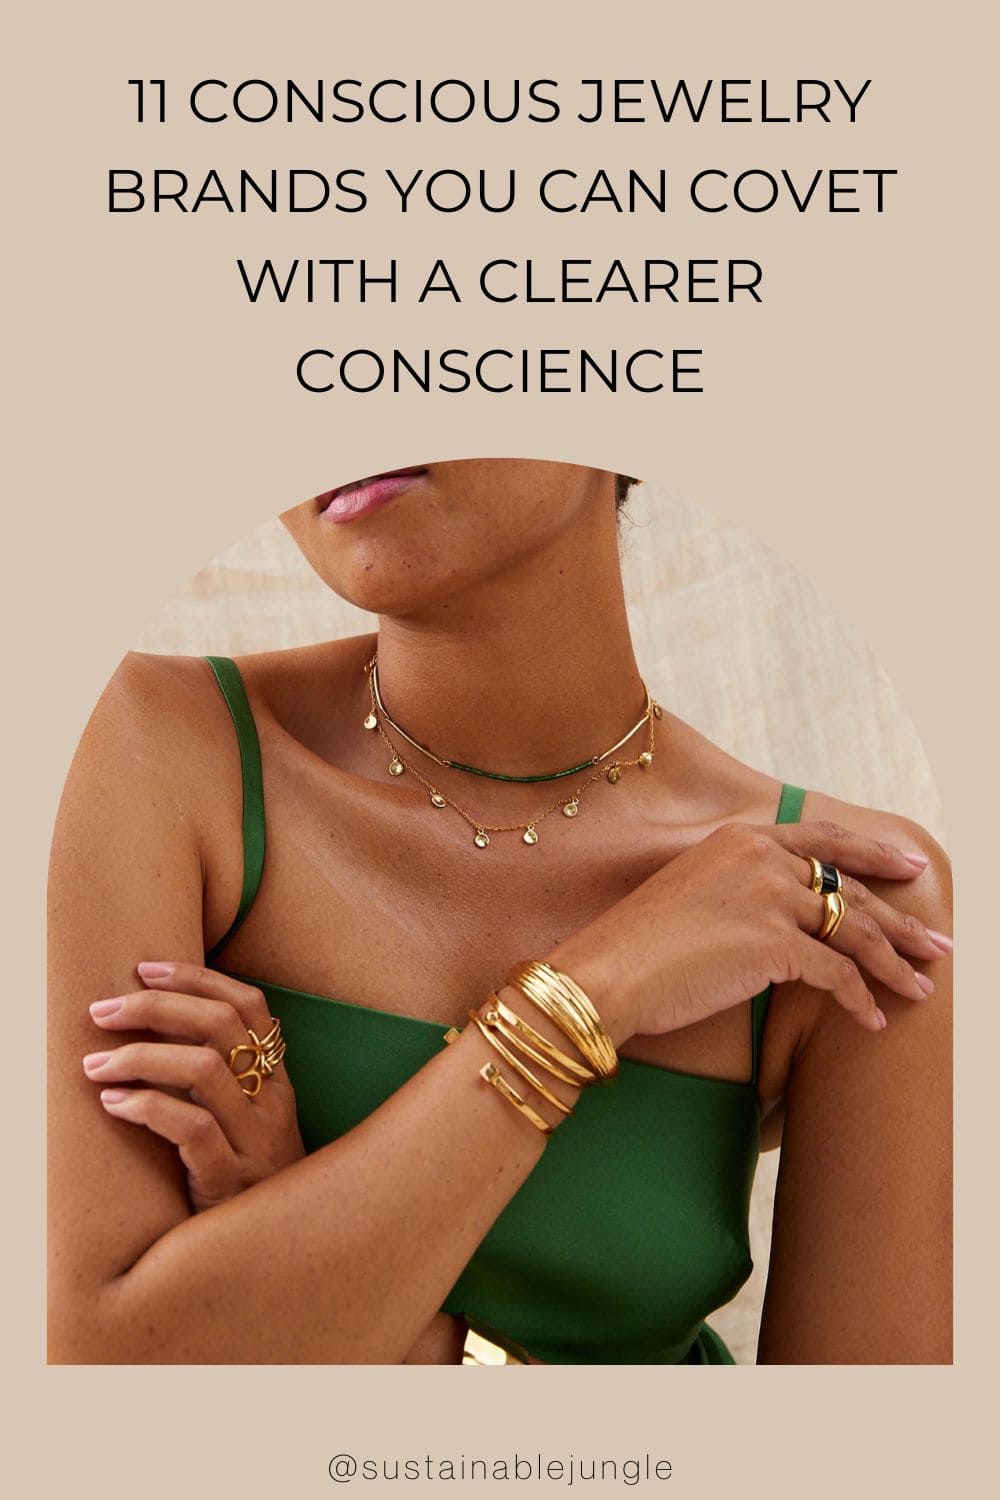 11 Conscious Jewelry Brands You Can Covet With A Clearer Conscience Image by SOKO #consciousjewery #earthconsciousjewelry #consciousjewelrybrands #sociallyconsciousjewelry #consciousgems #sustainablejungle